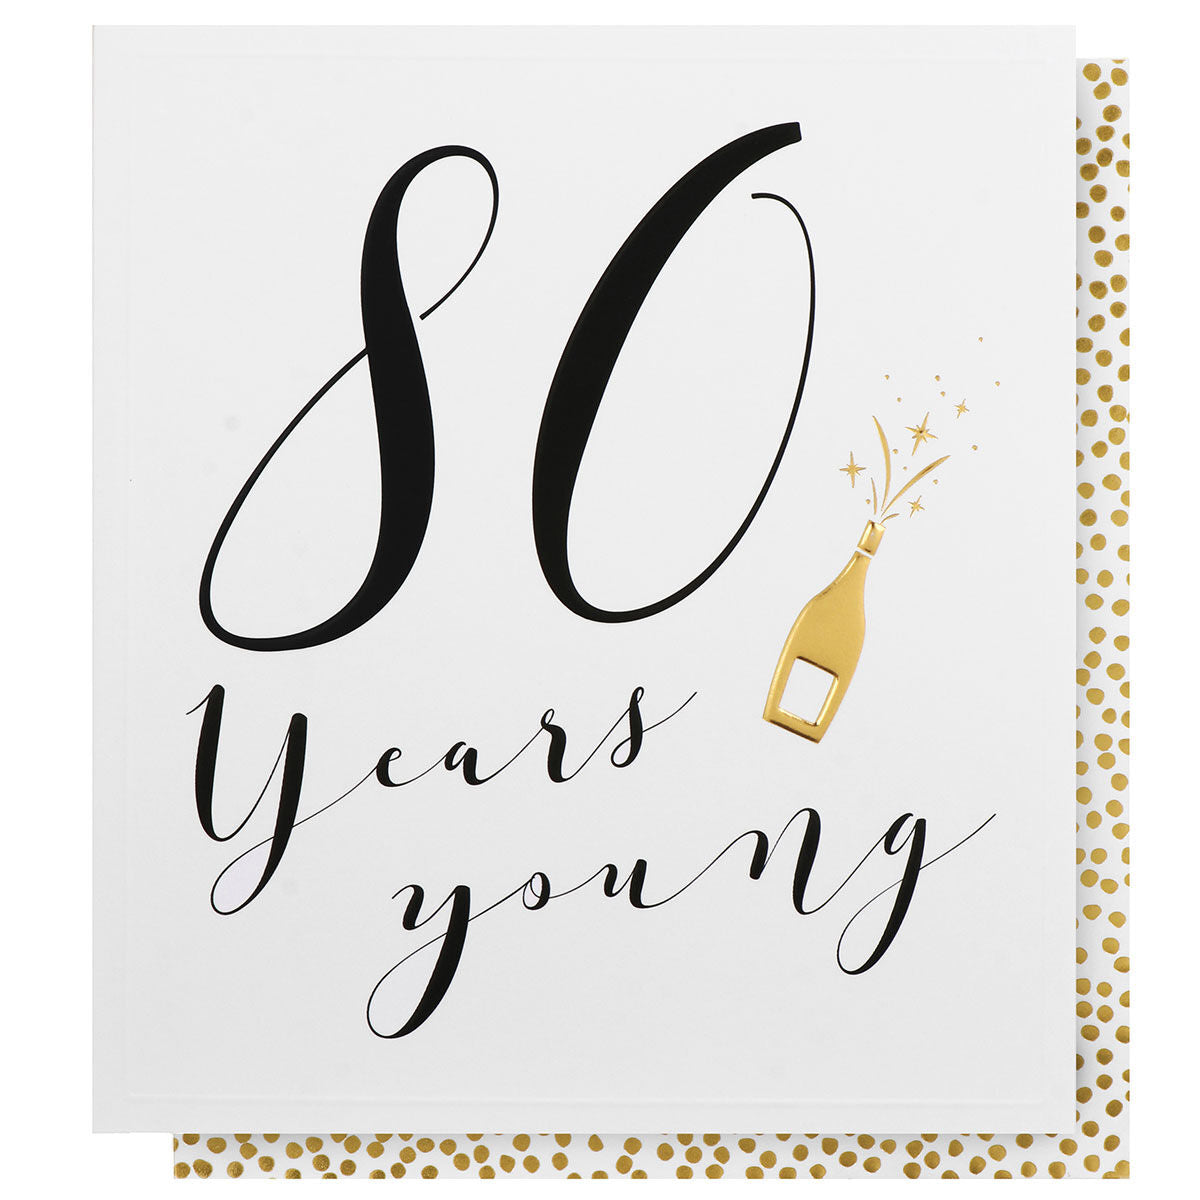 80th Birthday Card - No frills Golden Champagne Popping